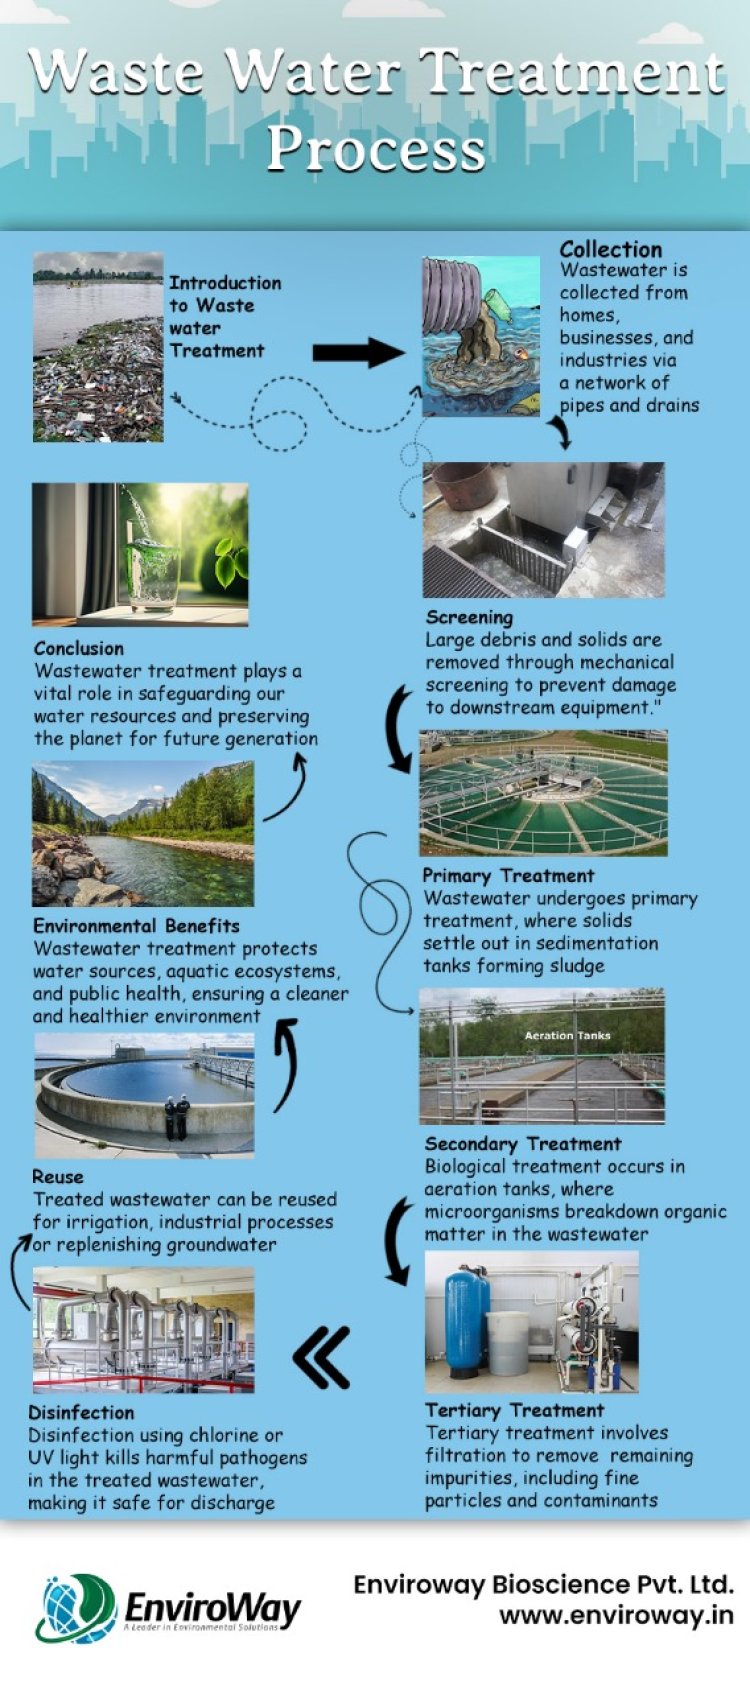 Finding the Best Wastewater Treatment Company: Look No Further Than Enviroway Bioscience